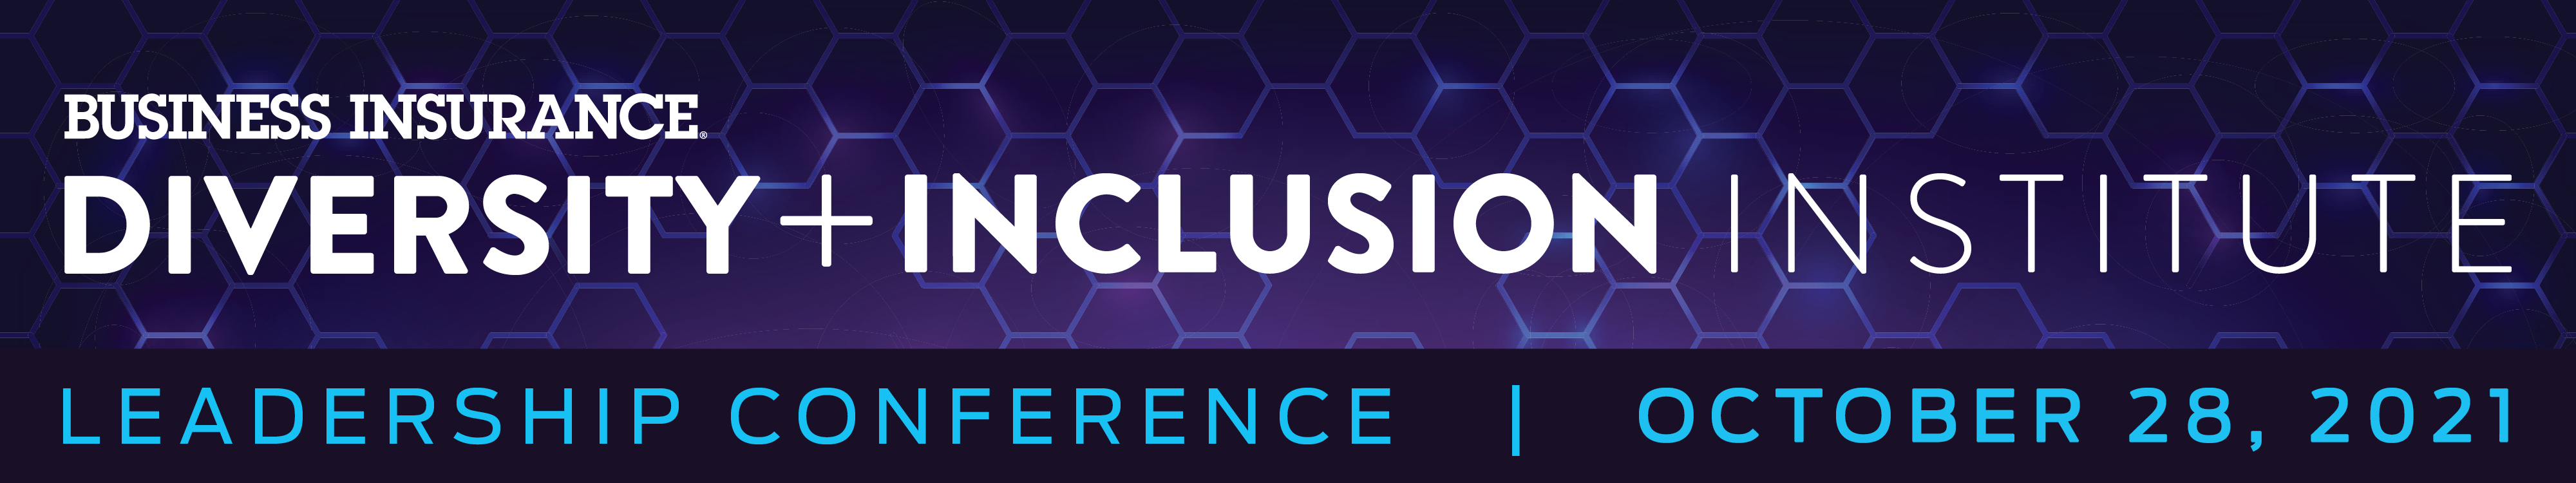 2021 DIVERSITY & INCLUSION VIRTUAL CONFERENCE